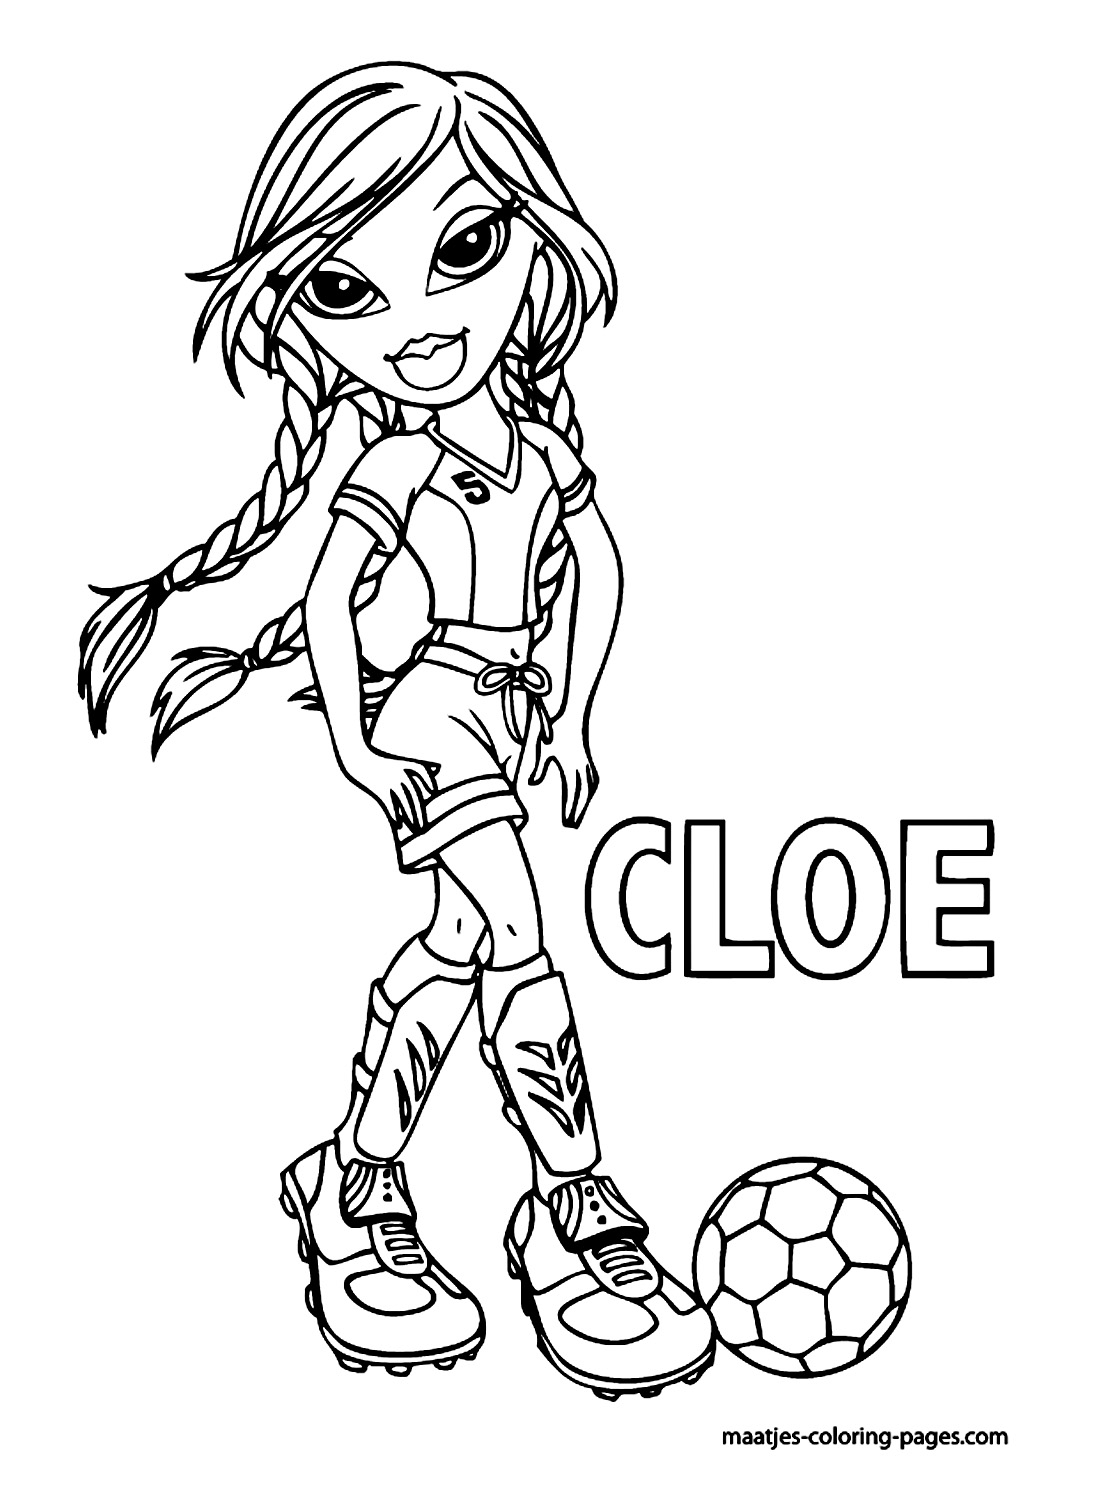 Cloe Coloring Pages